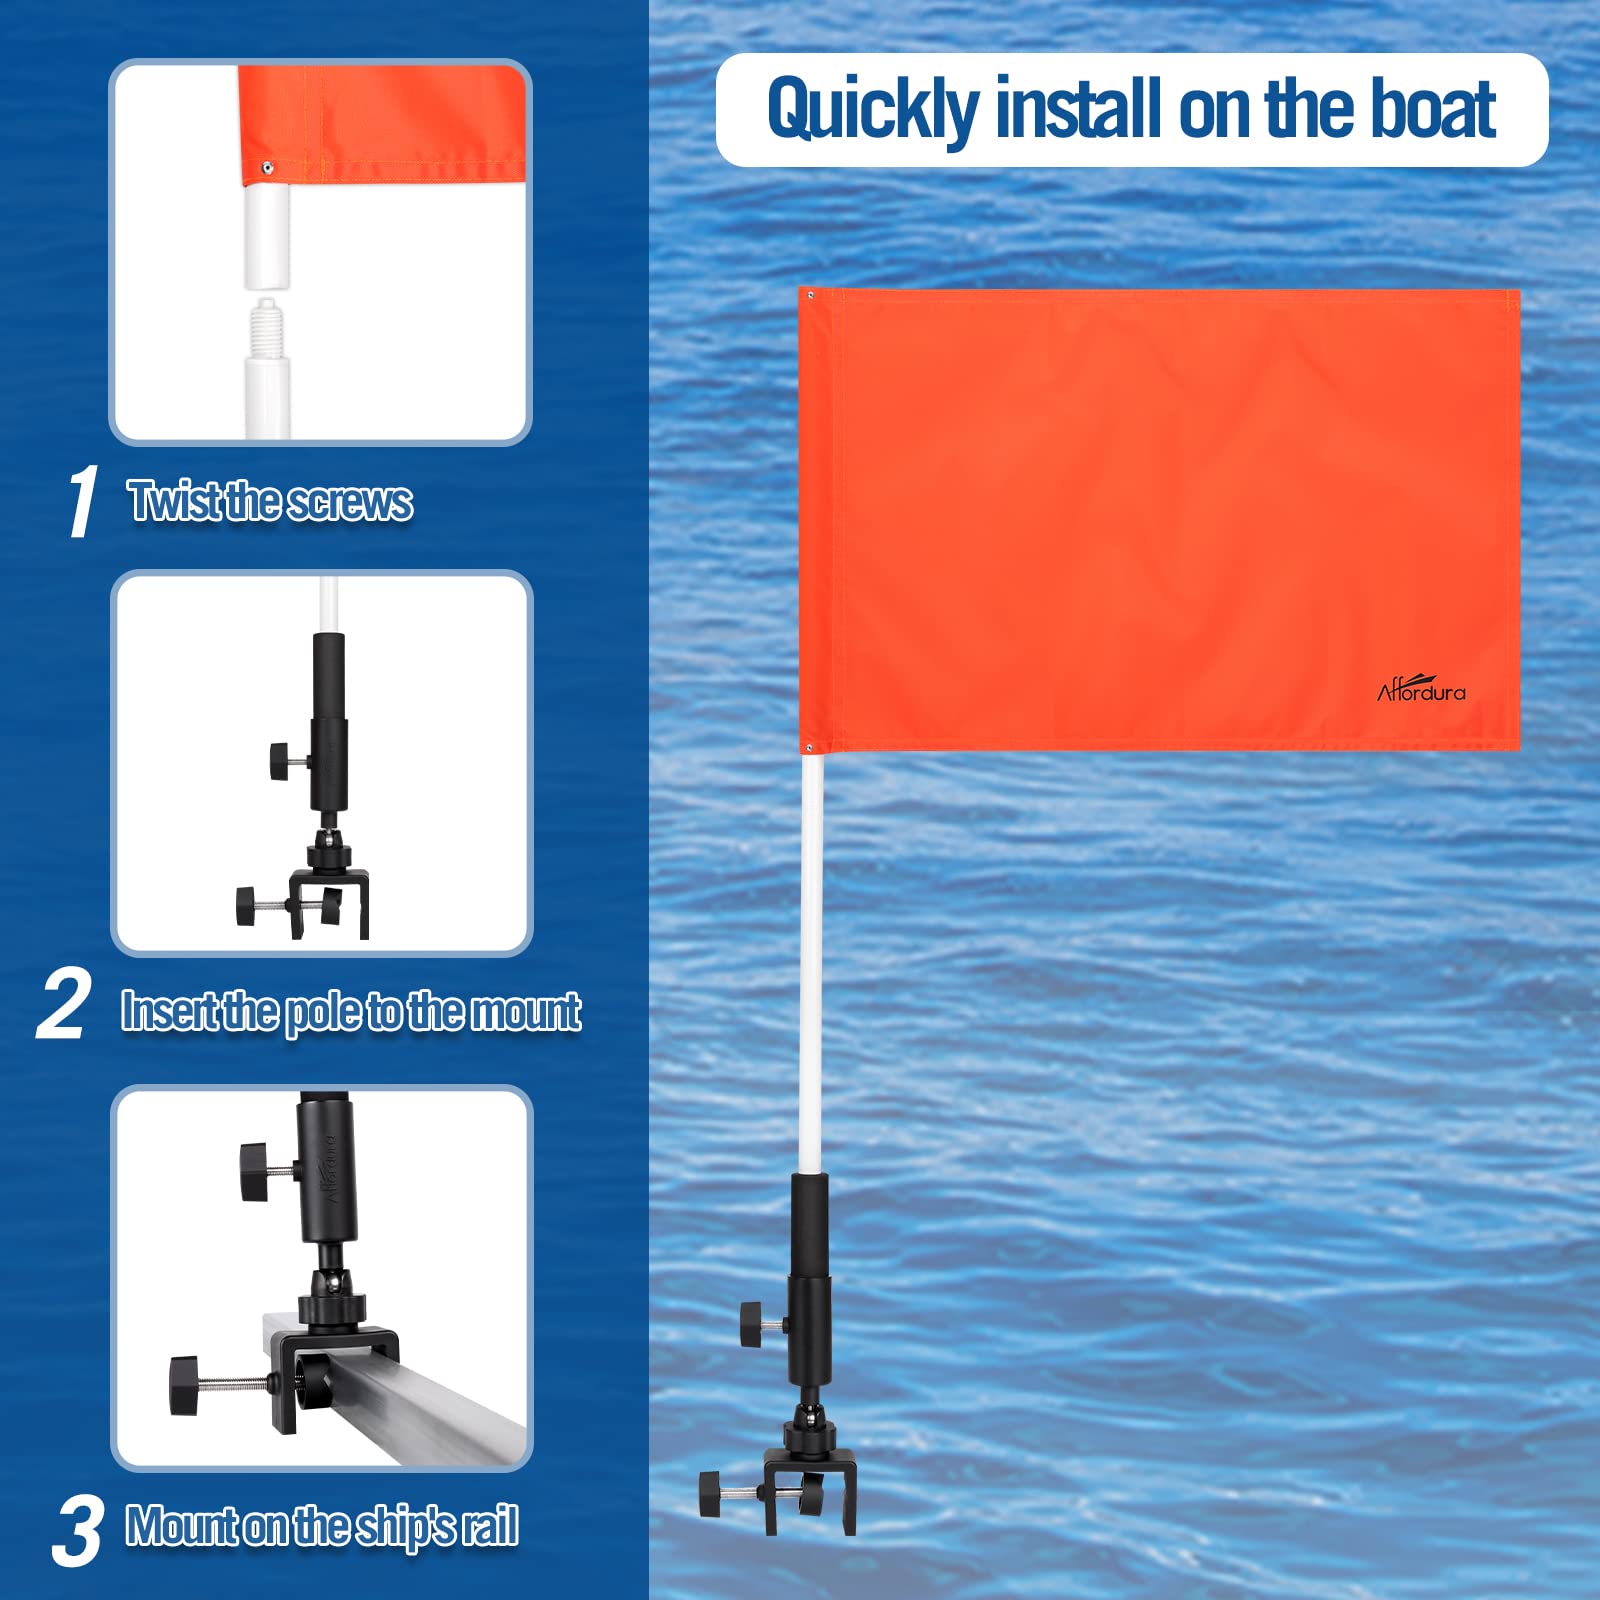 Affordura Orange Boat Flag Holder 30 Inch Water Ski Flag for 0.5-1.33 Inch Round and Pontoon Square Rails Boat Safety Flag Rotating Mount Skier Down Flag with Storage Bag and Velcro